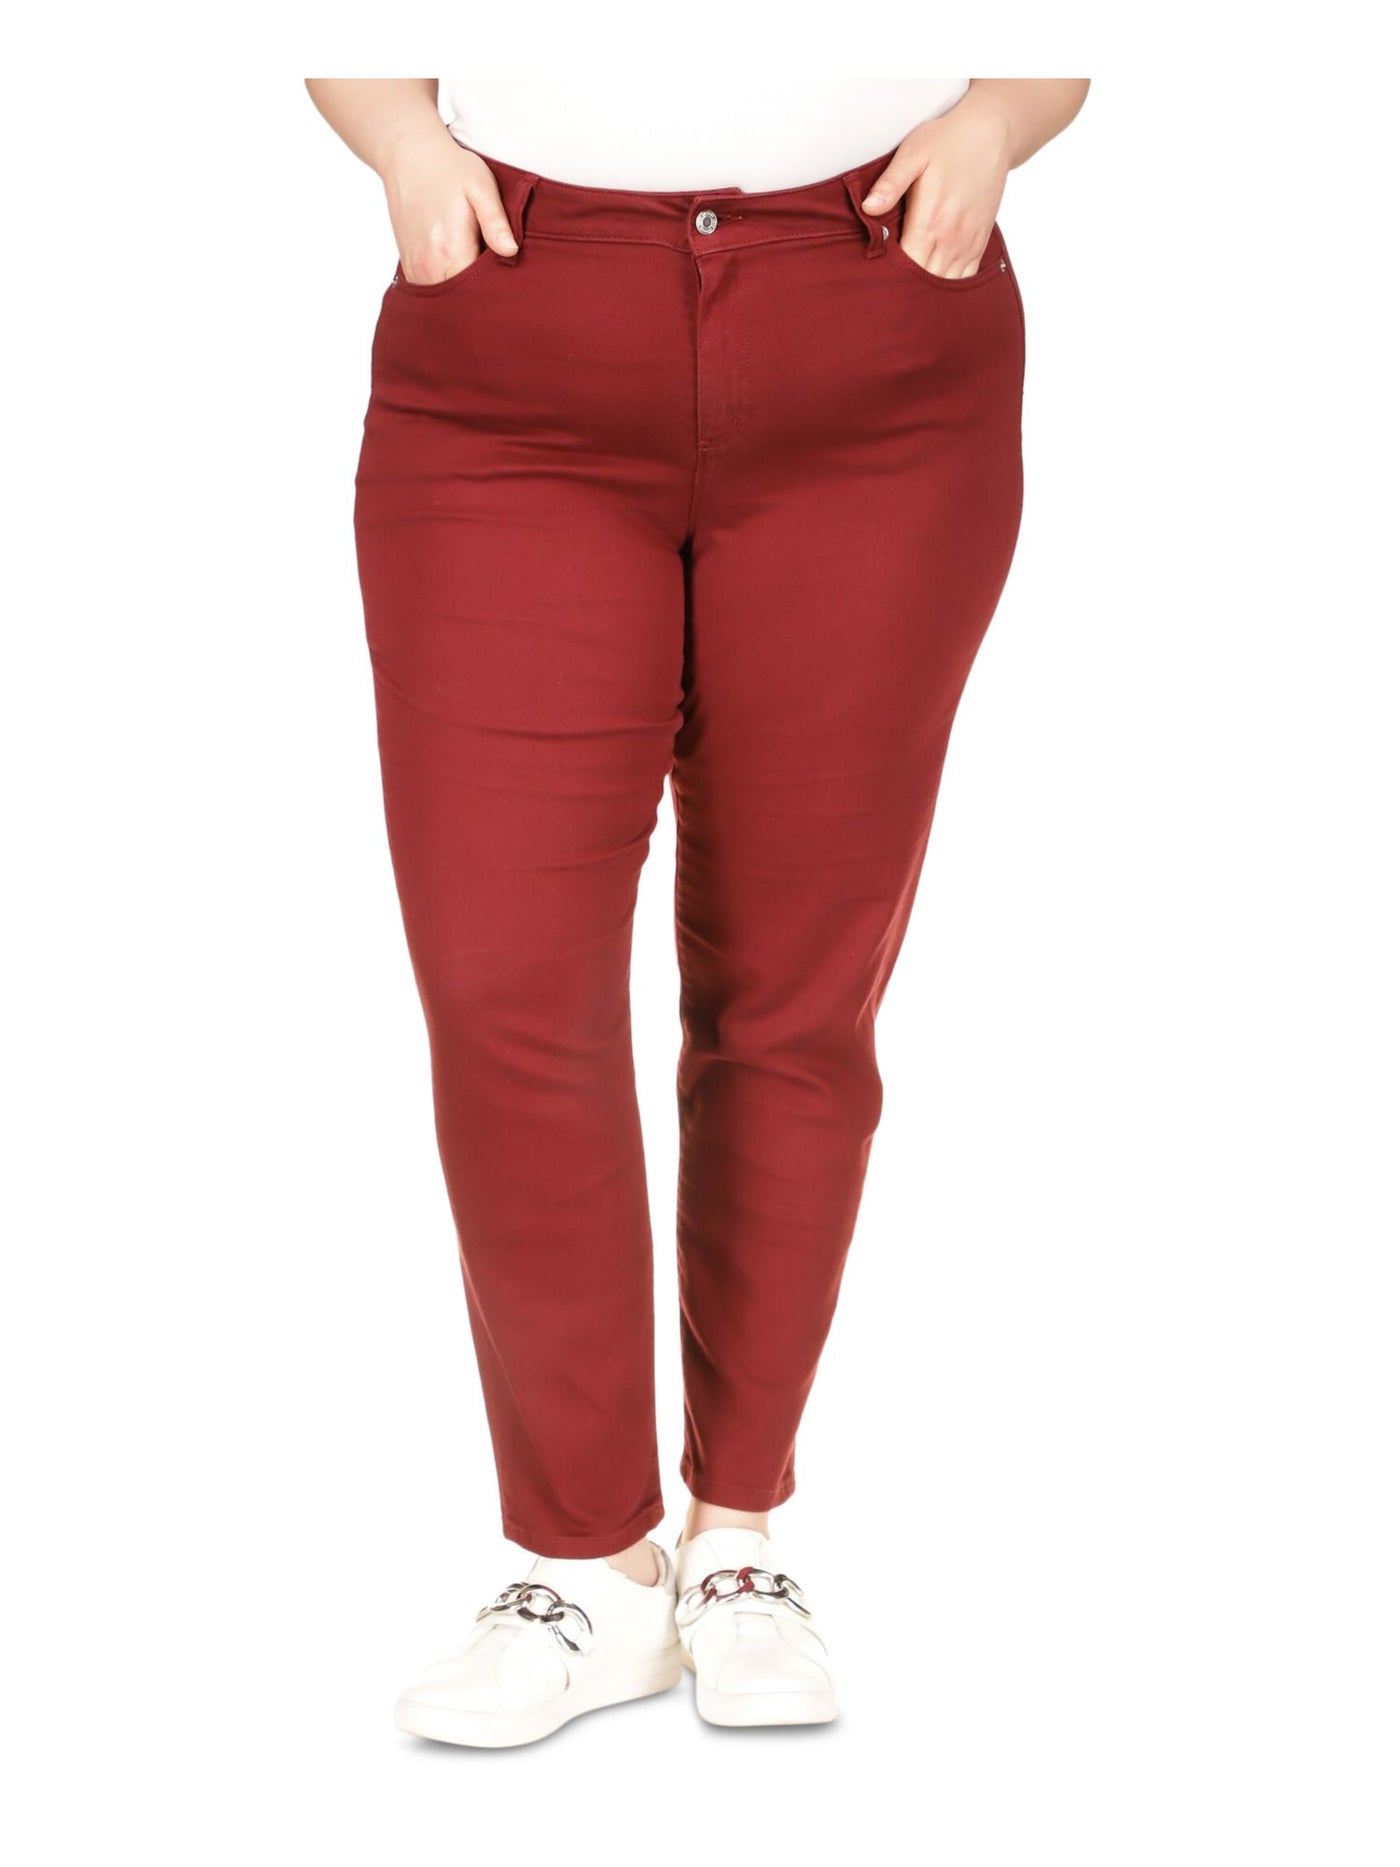 MICHAEL MICHAEL KORS Womens Red Stretch Pocketed Zippered Button Front High Waisted Skinny Jeans Plus 20W